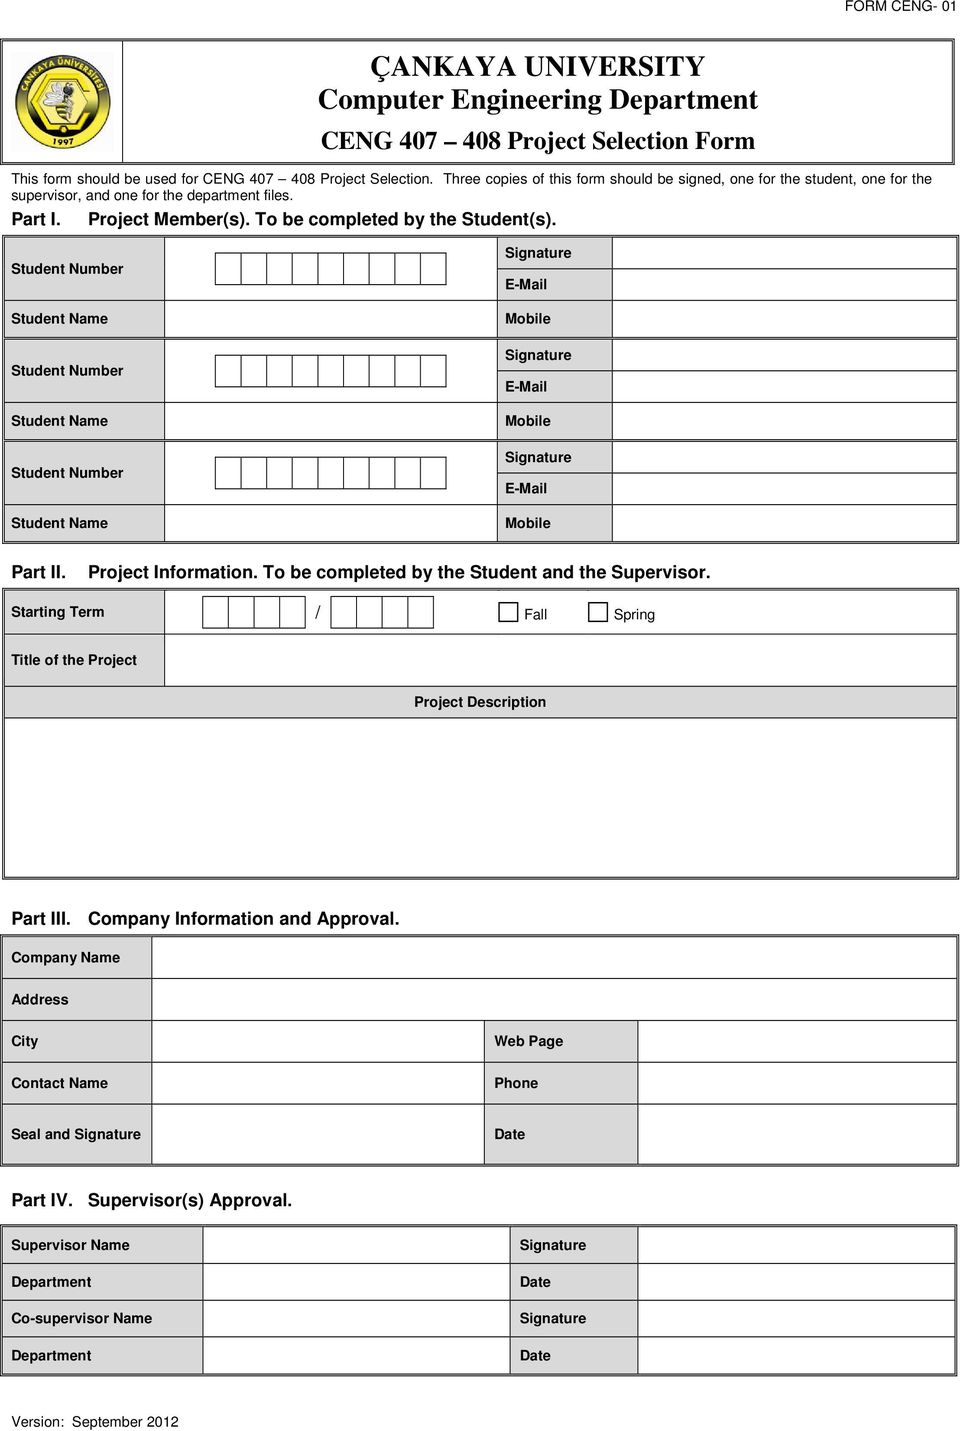 E-Mail Mobile E-Mail Mobile E-Mail Mobile Part II. Project Information. To be completed by the Student and the Supervisor.